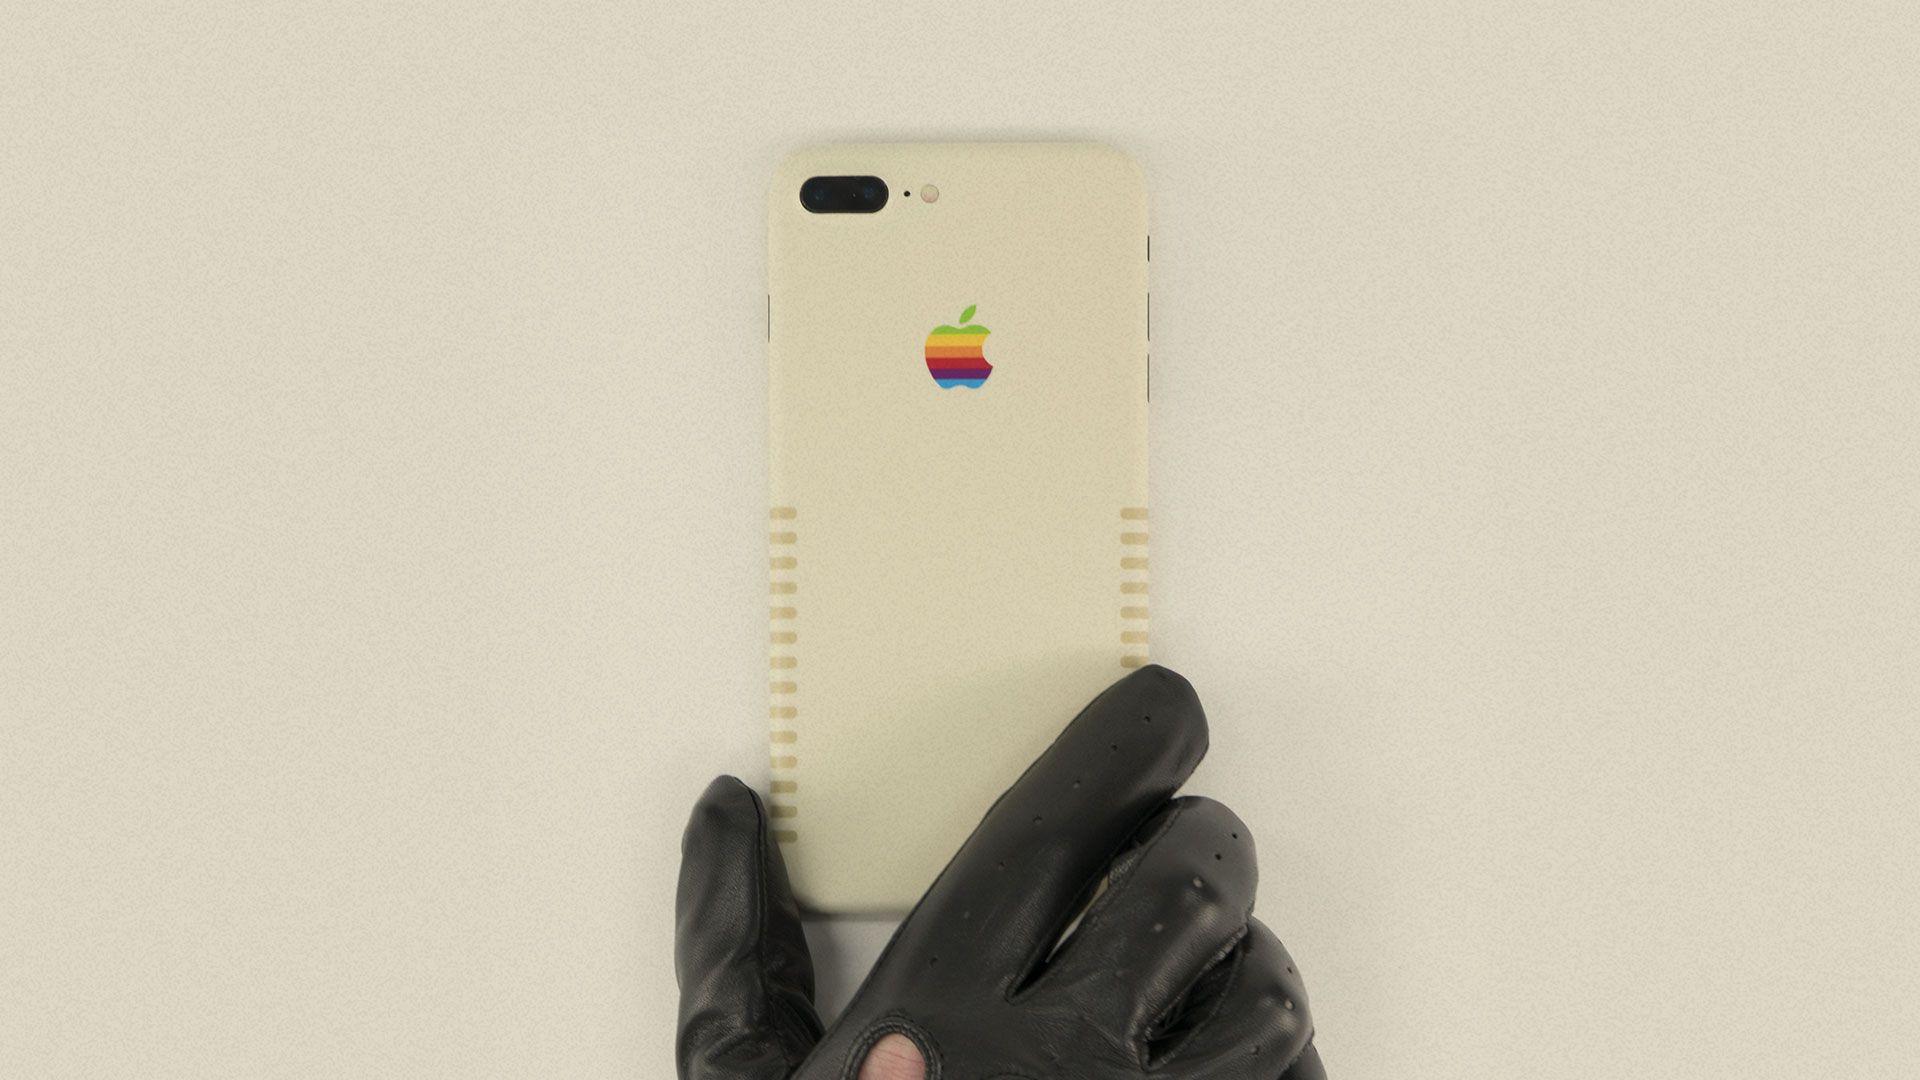 SlickBlog IT LIKE THE '70S WITH RETRO APPLE IPHONE WRAP